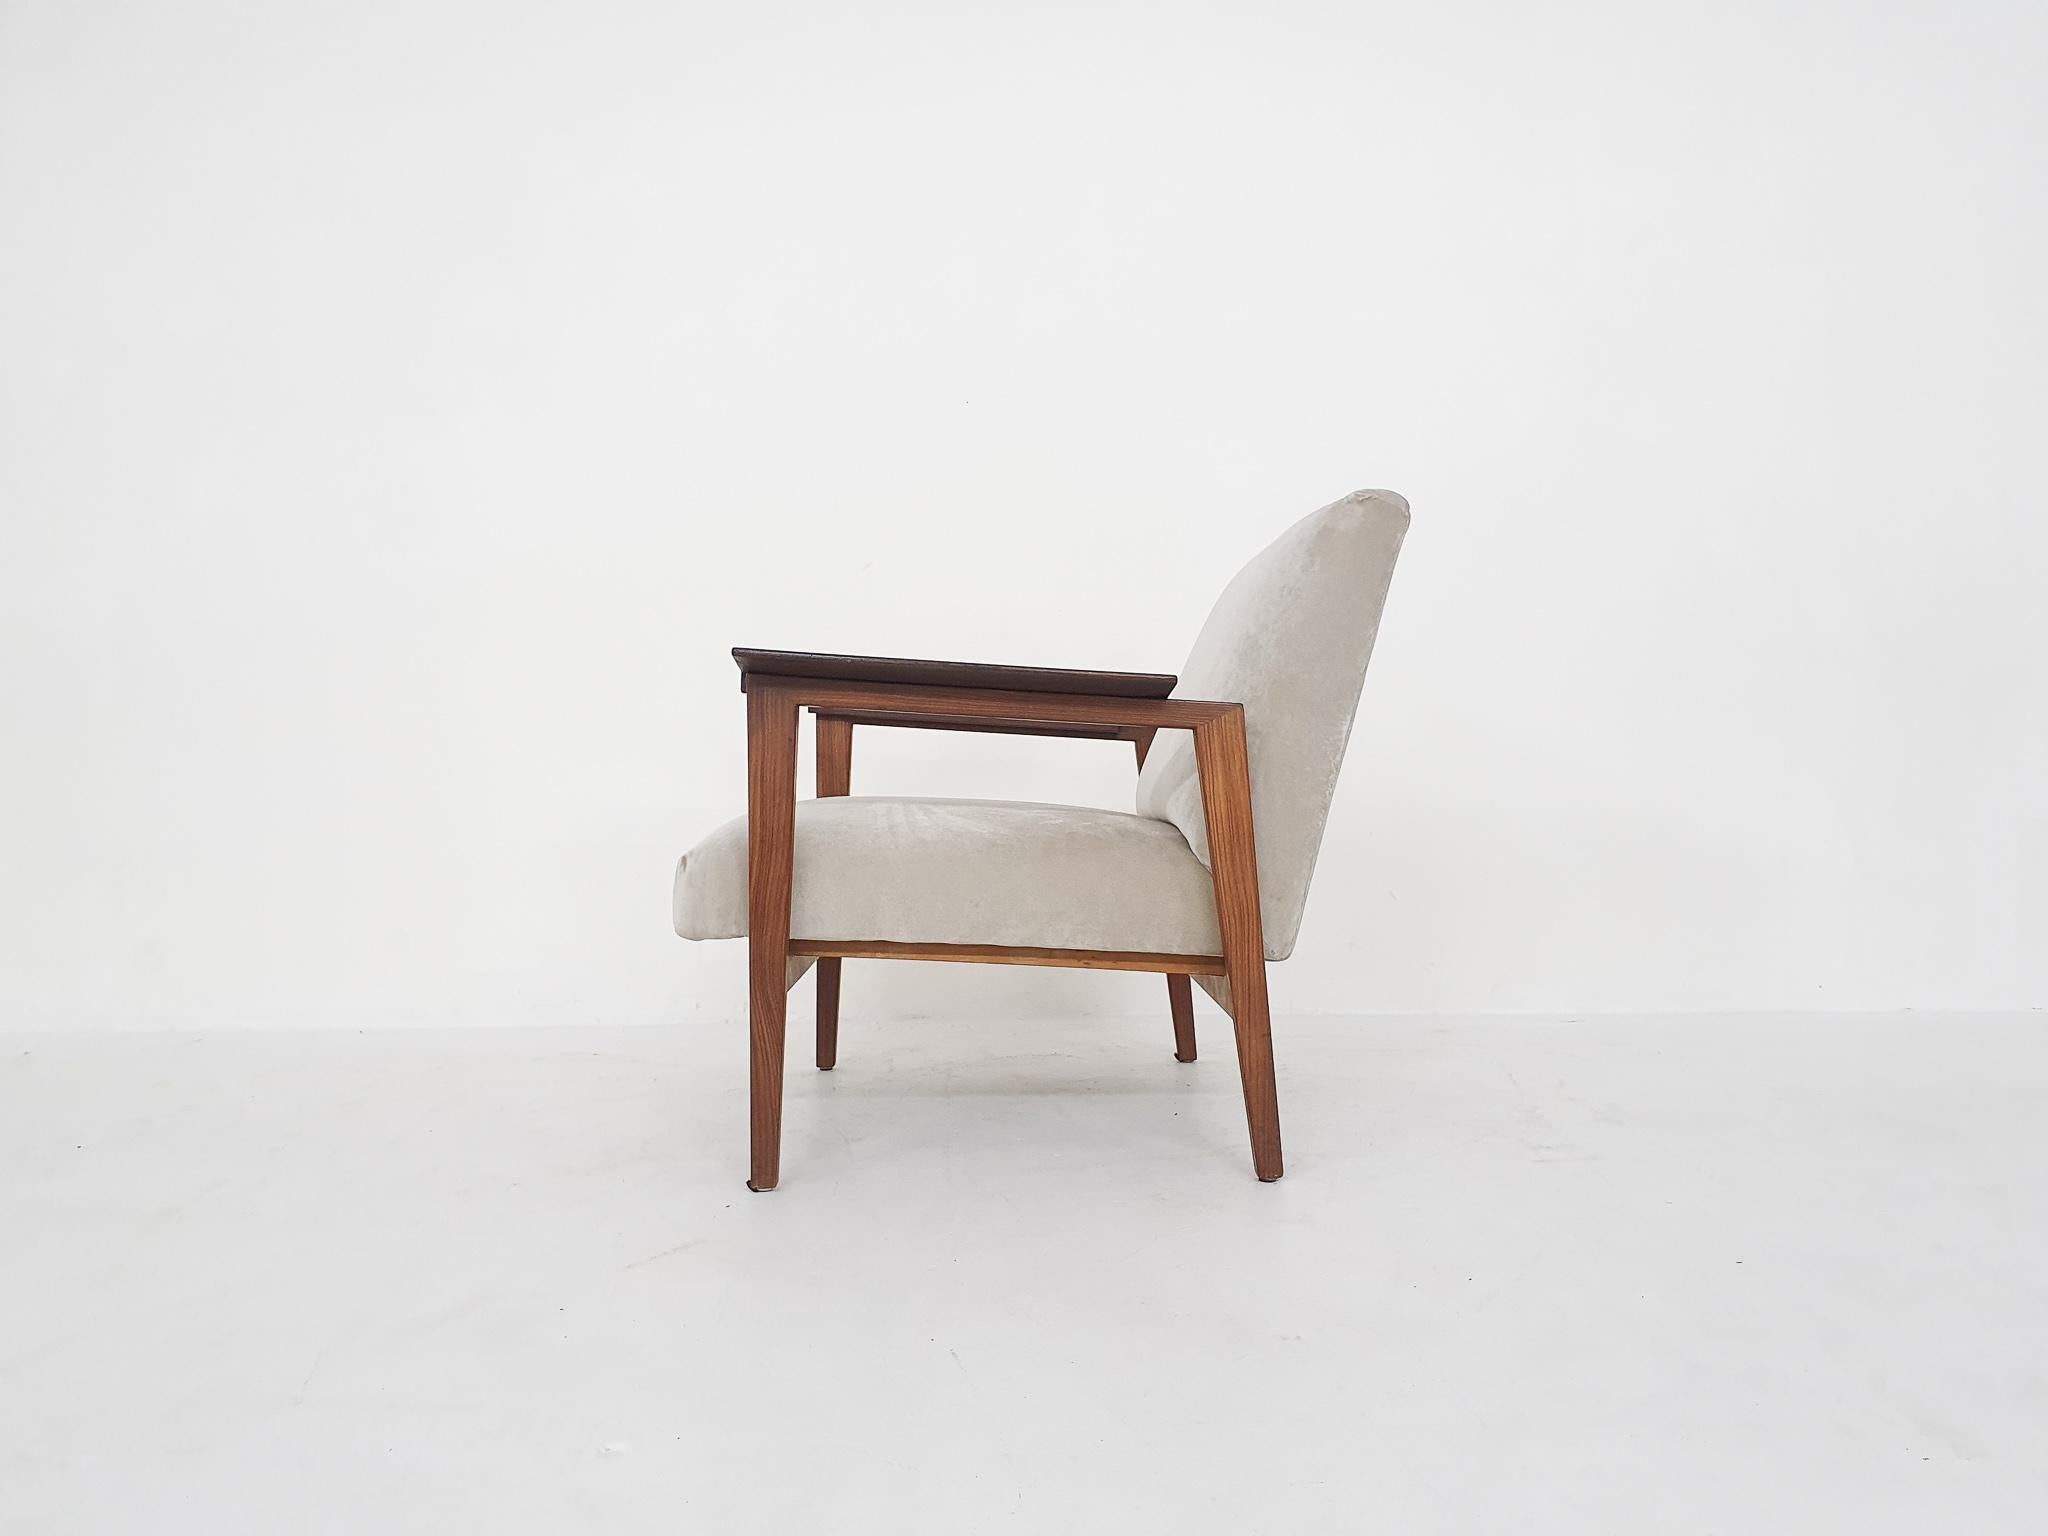 Teak lounge chair from the 1960's with new beige velvet upholstery.